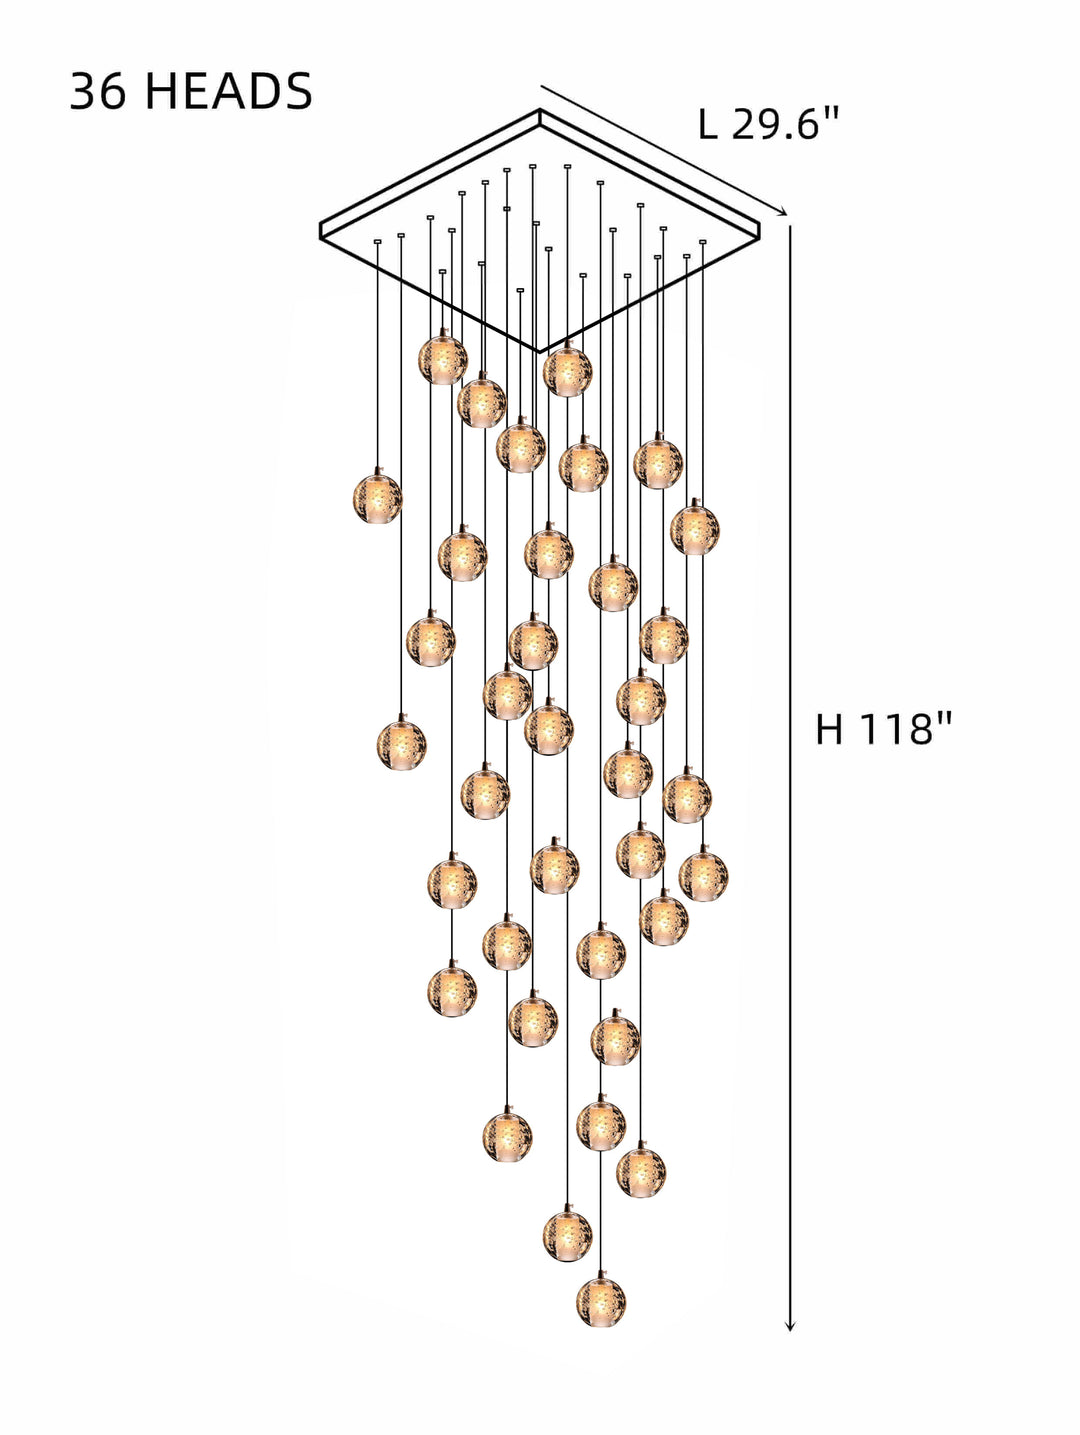 Spiral Mulit-Light Crystal Bubble Chandelier For Large House Lobby and Small Livingroom